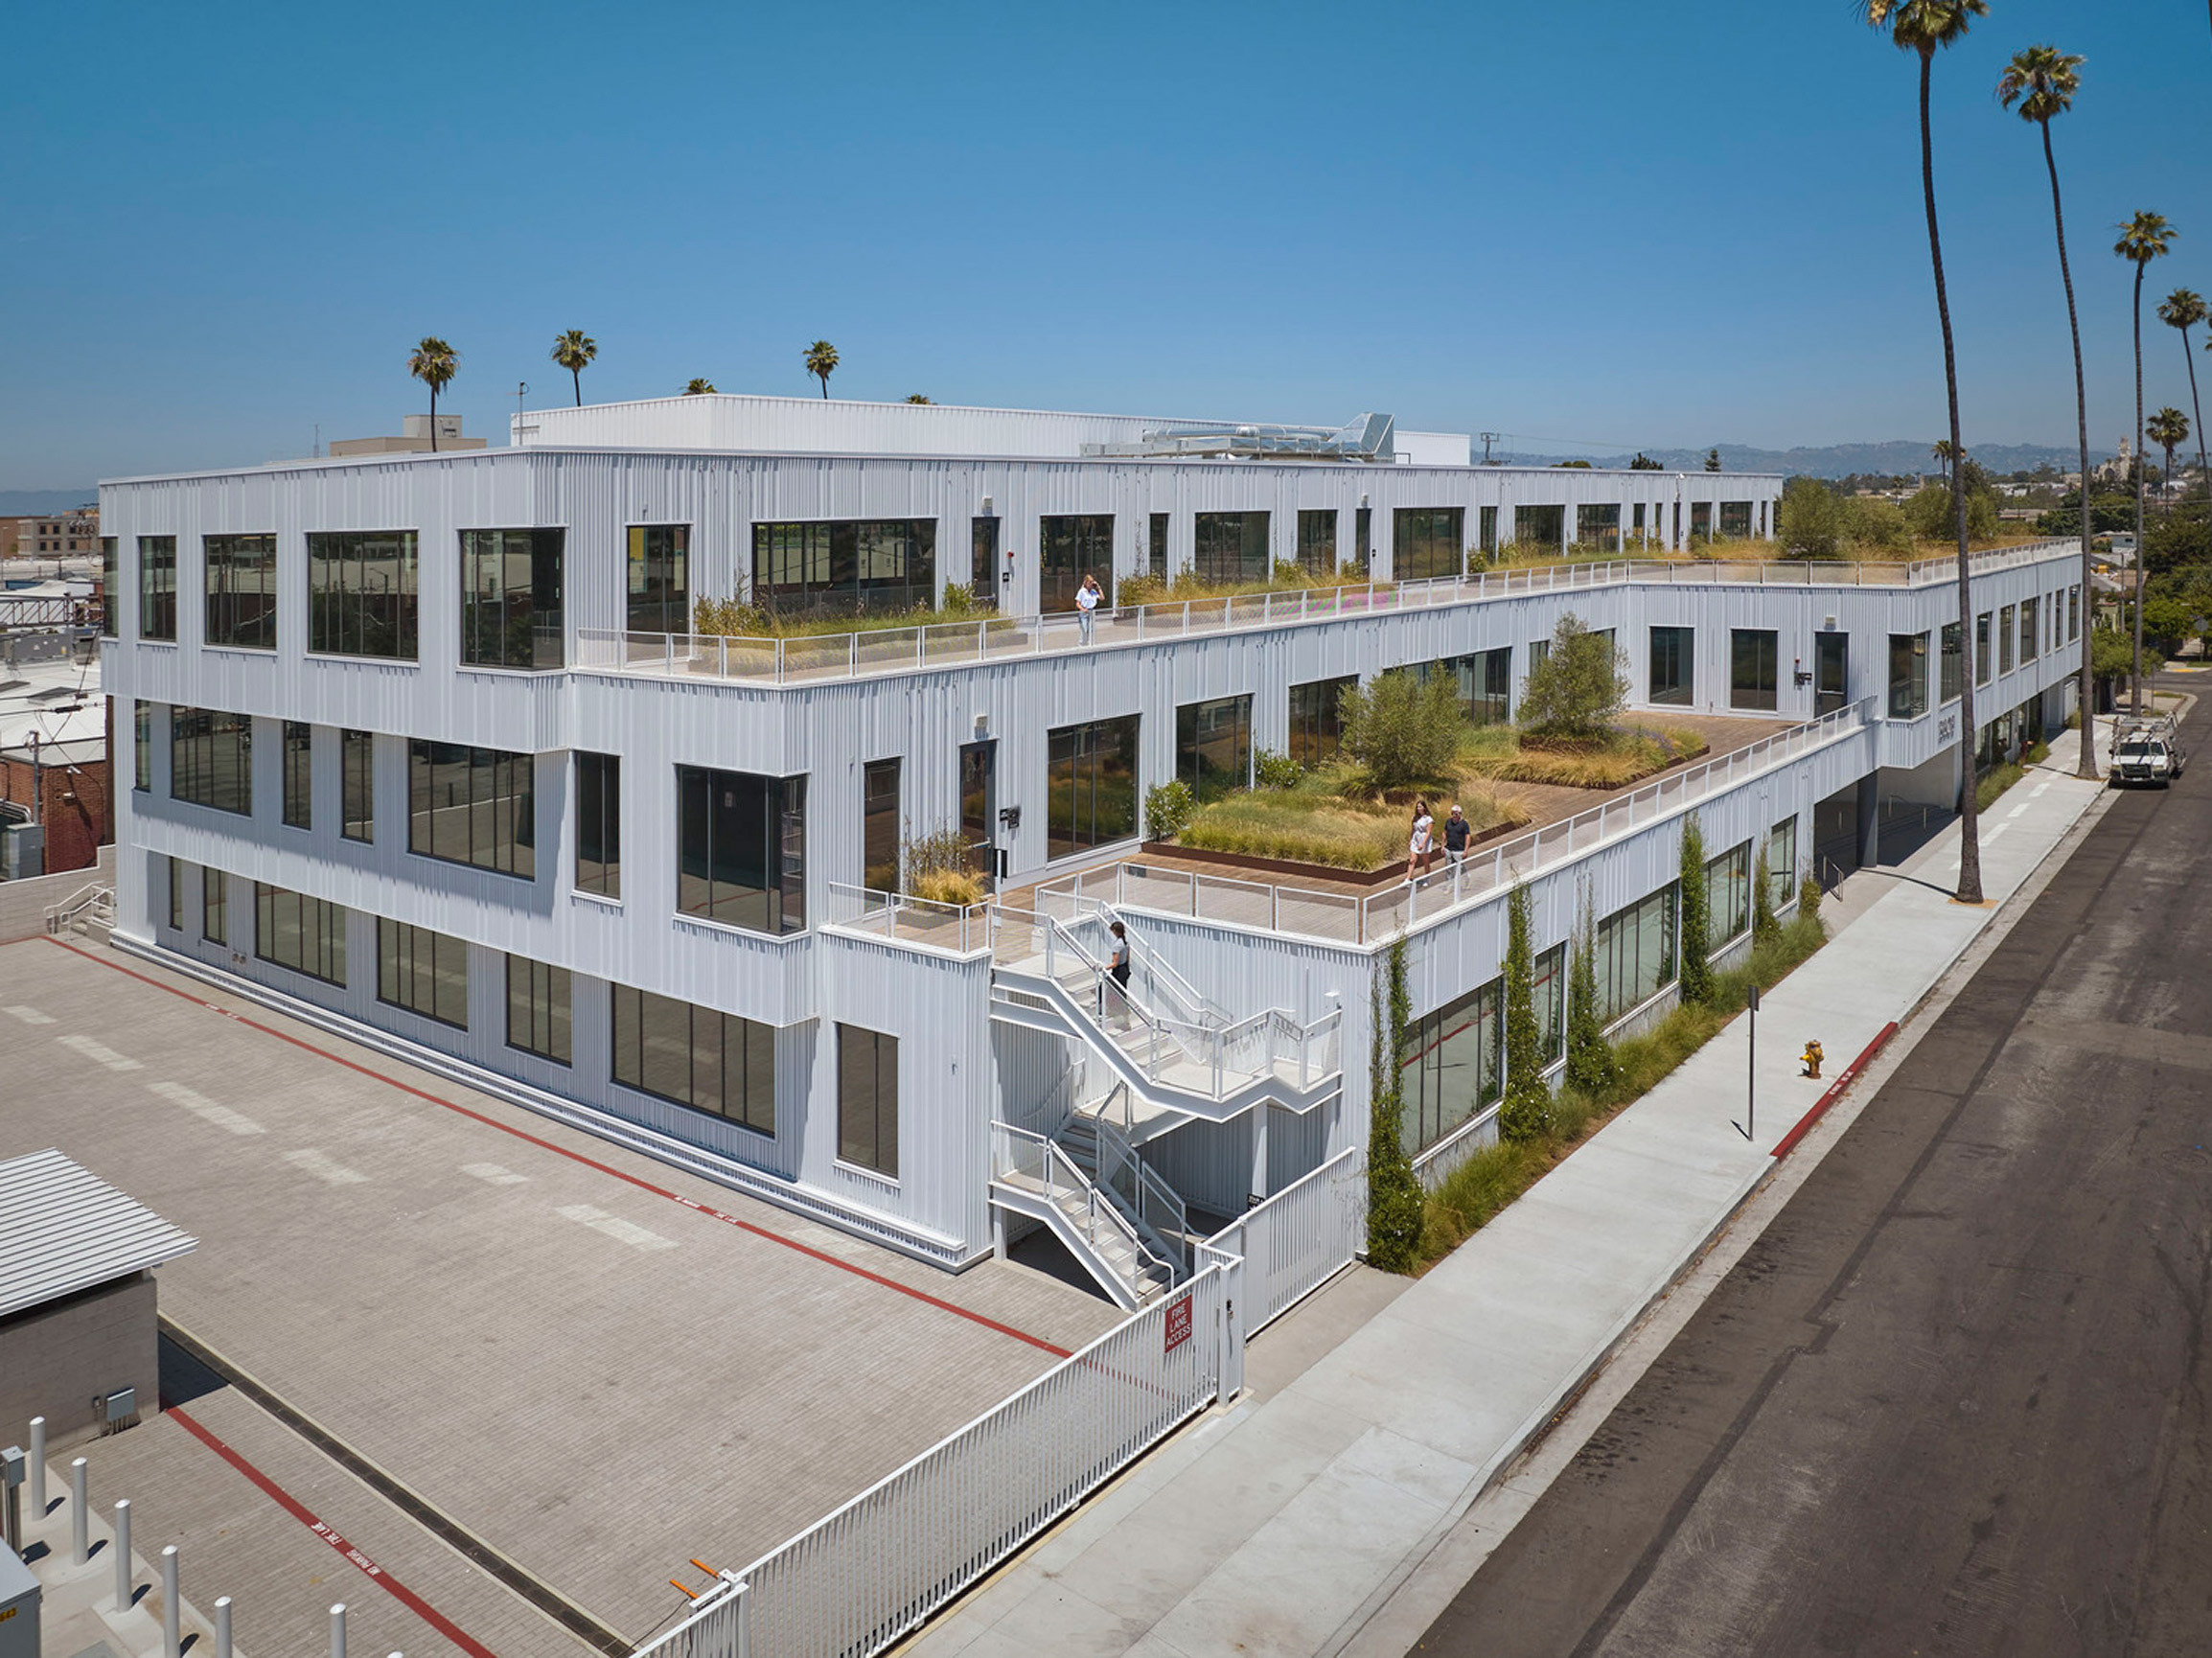 Modern two-story office building with asymmetrical design featuring a white facade, expansive windows for natural lighting, and eco-friendly green roof terraces amidst an urban landscape with palm trees.